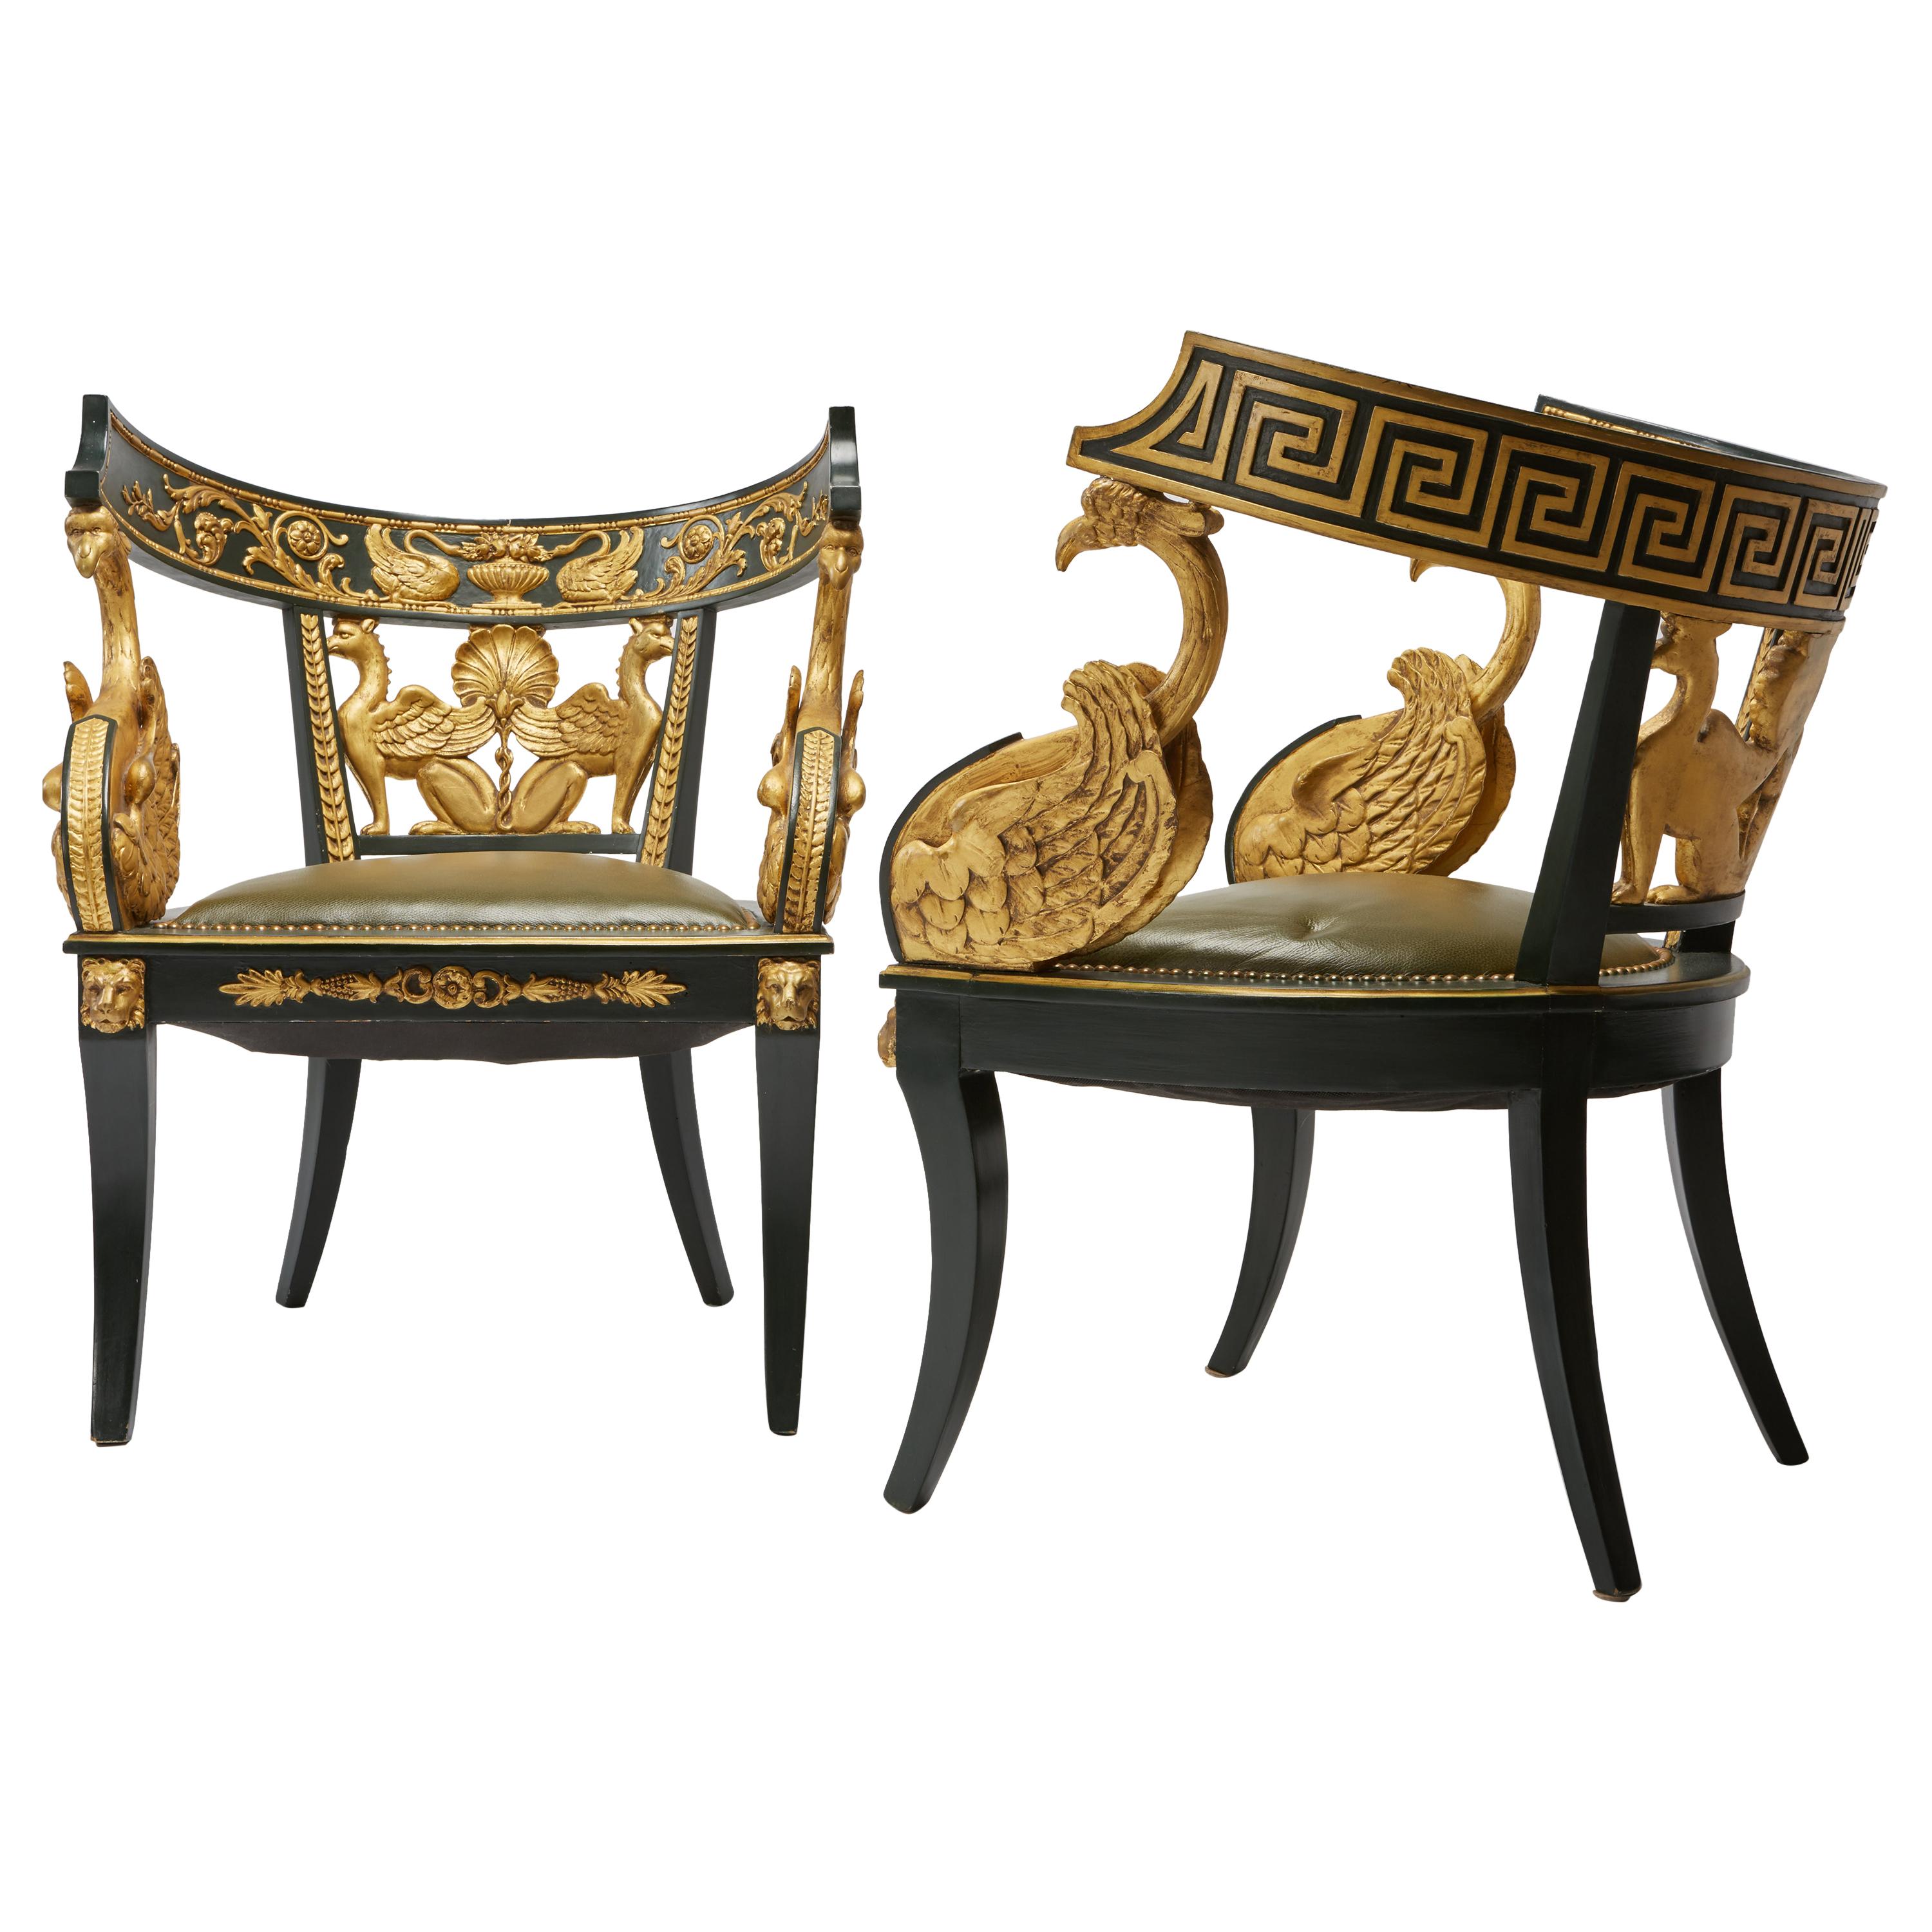 Pair of Giltwood & Green Imperial Roman Style Tub Chairs with Greek Key & Swans